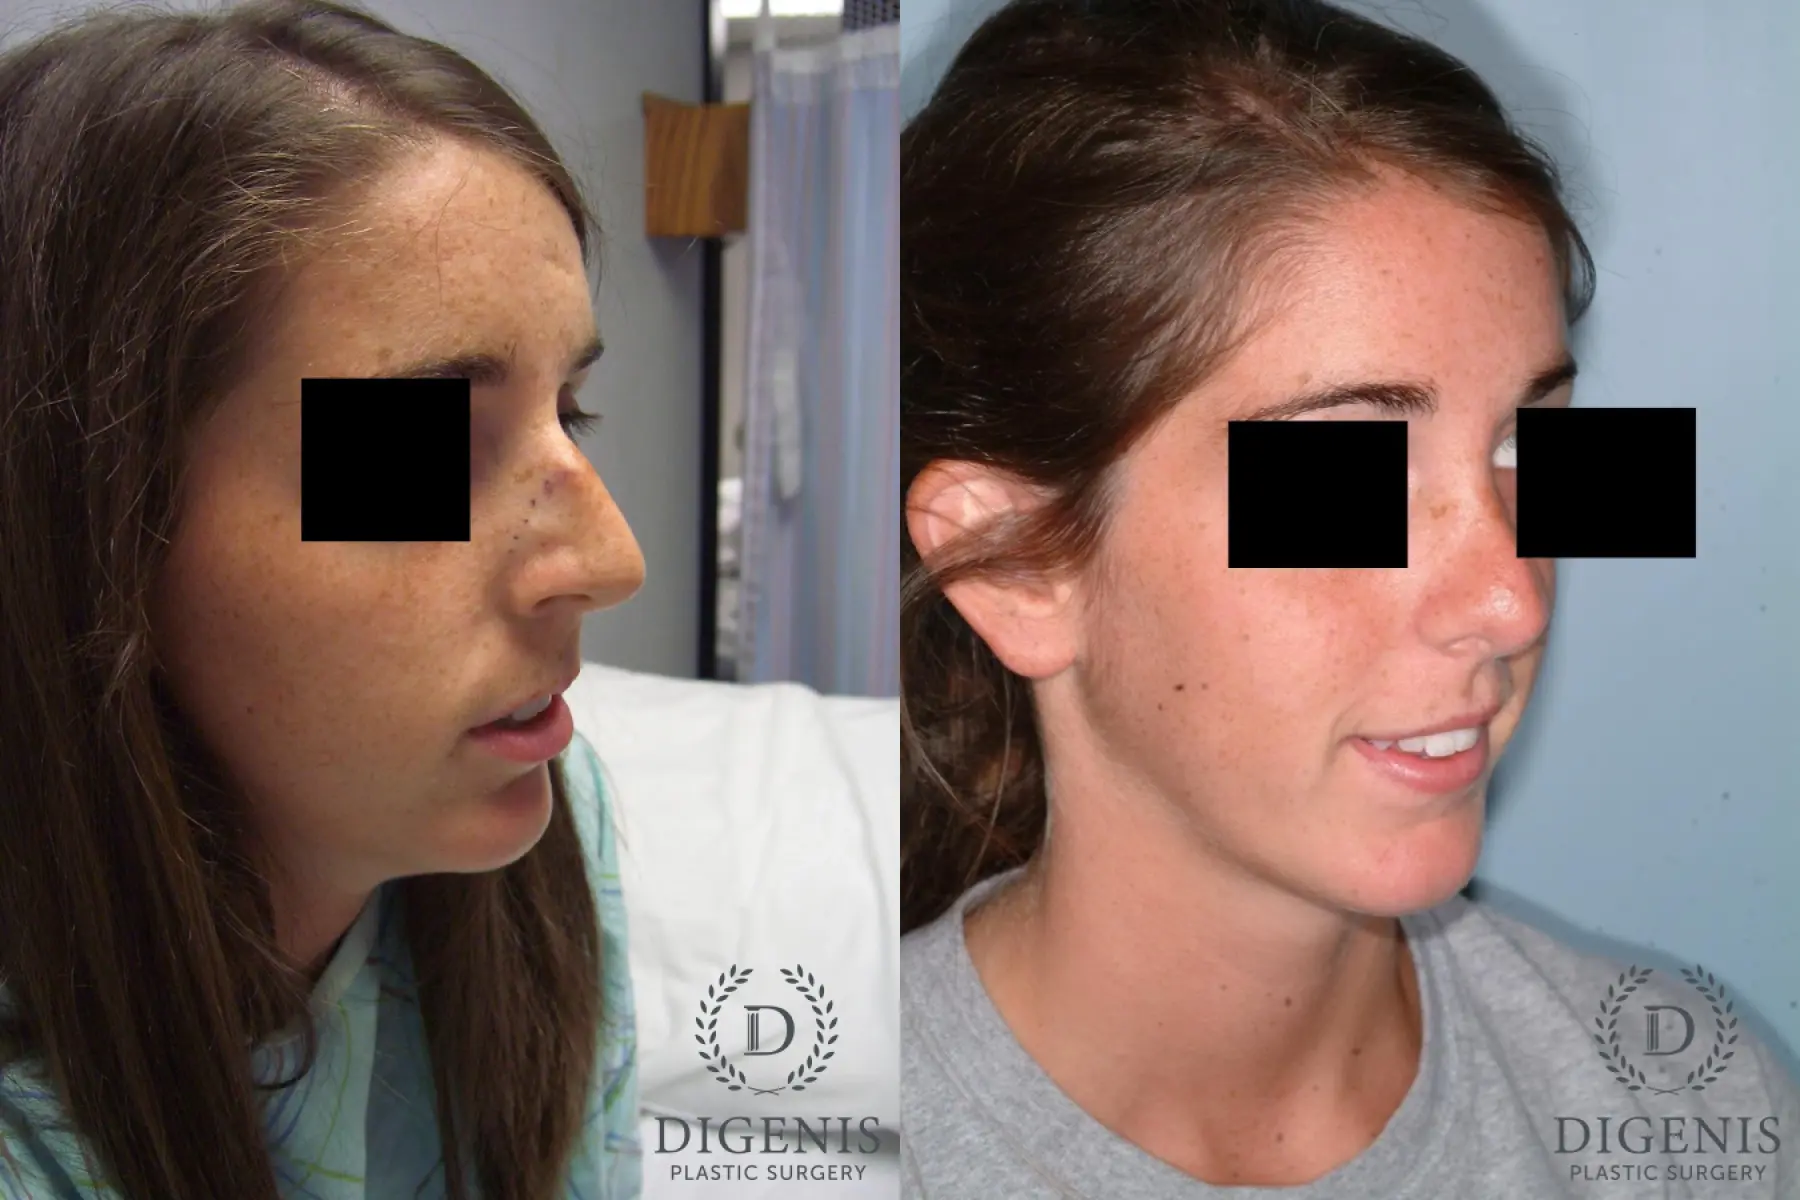 Rhinoplasty: Patient 6 - Before and After 2